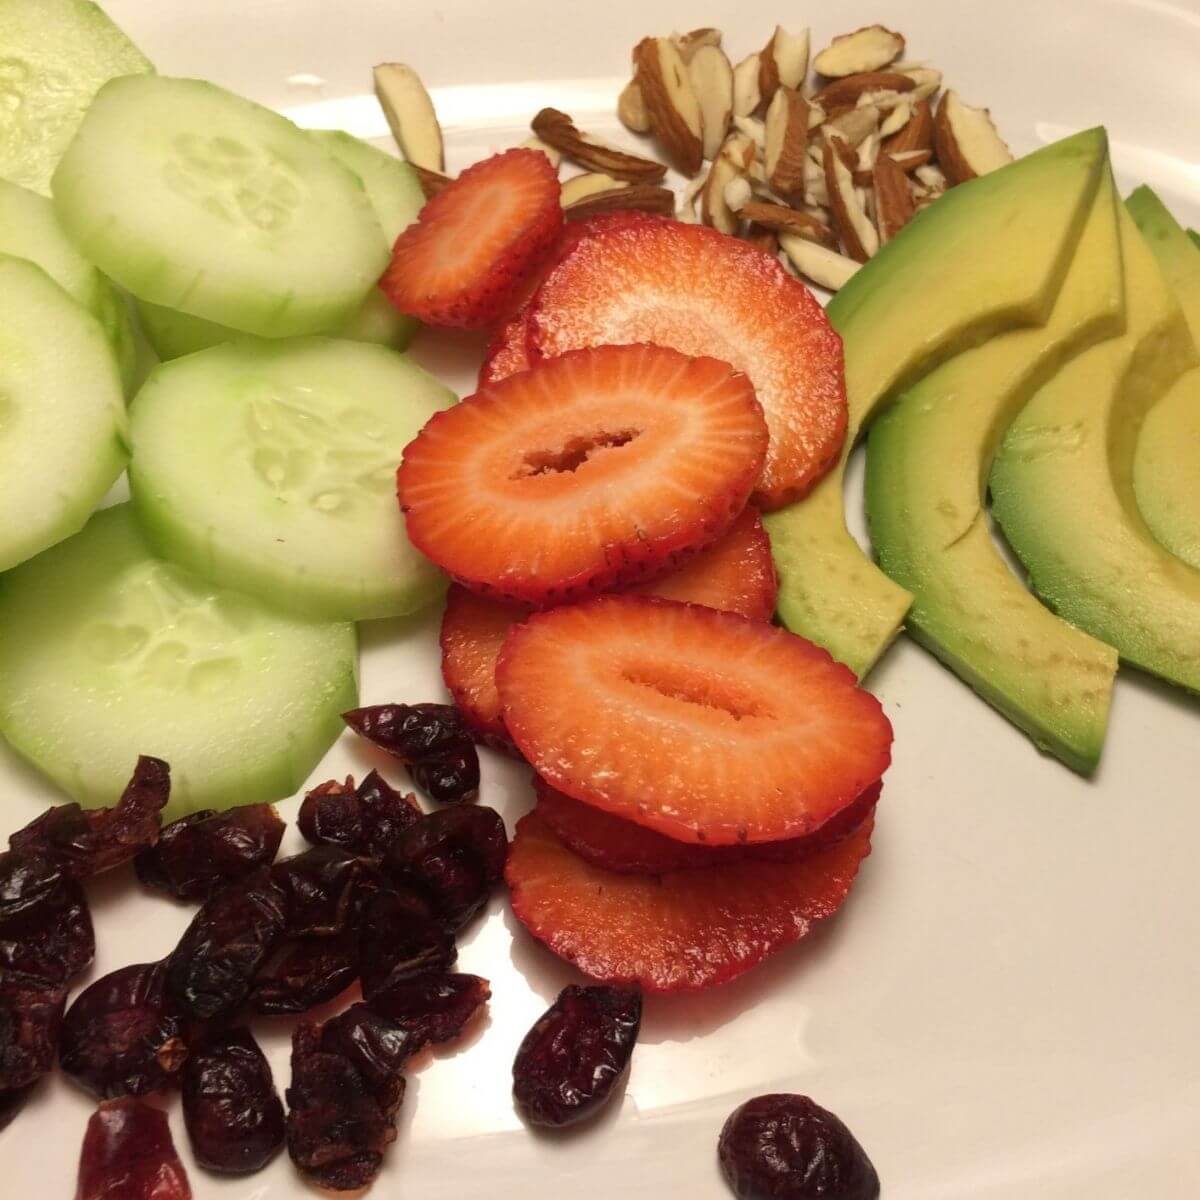 sliced cucumbers, strawberries, avocados, almonds, and whole dried craisins on a white plate